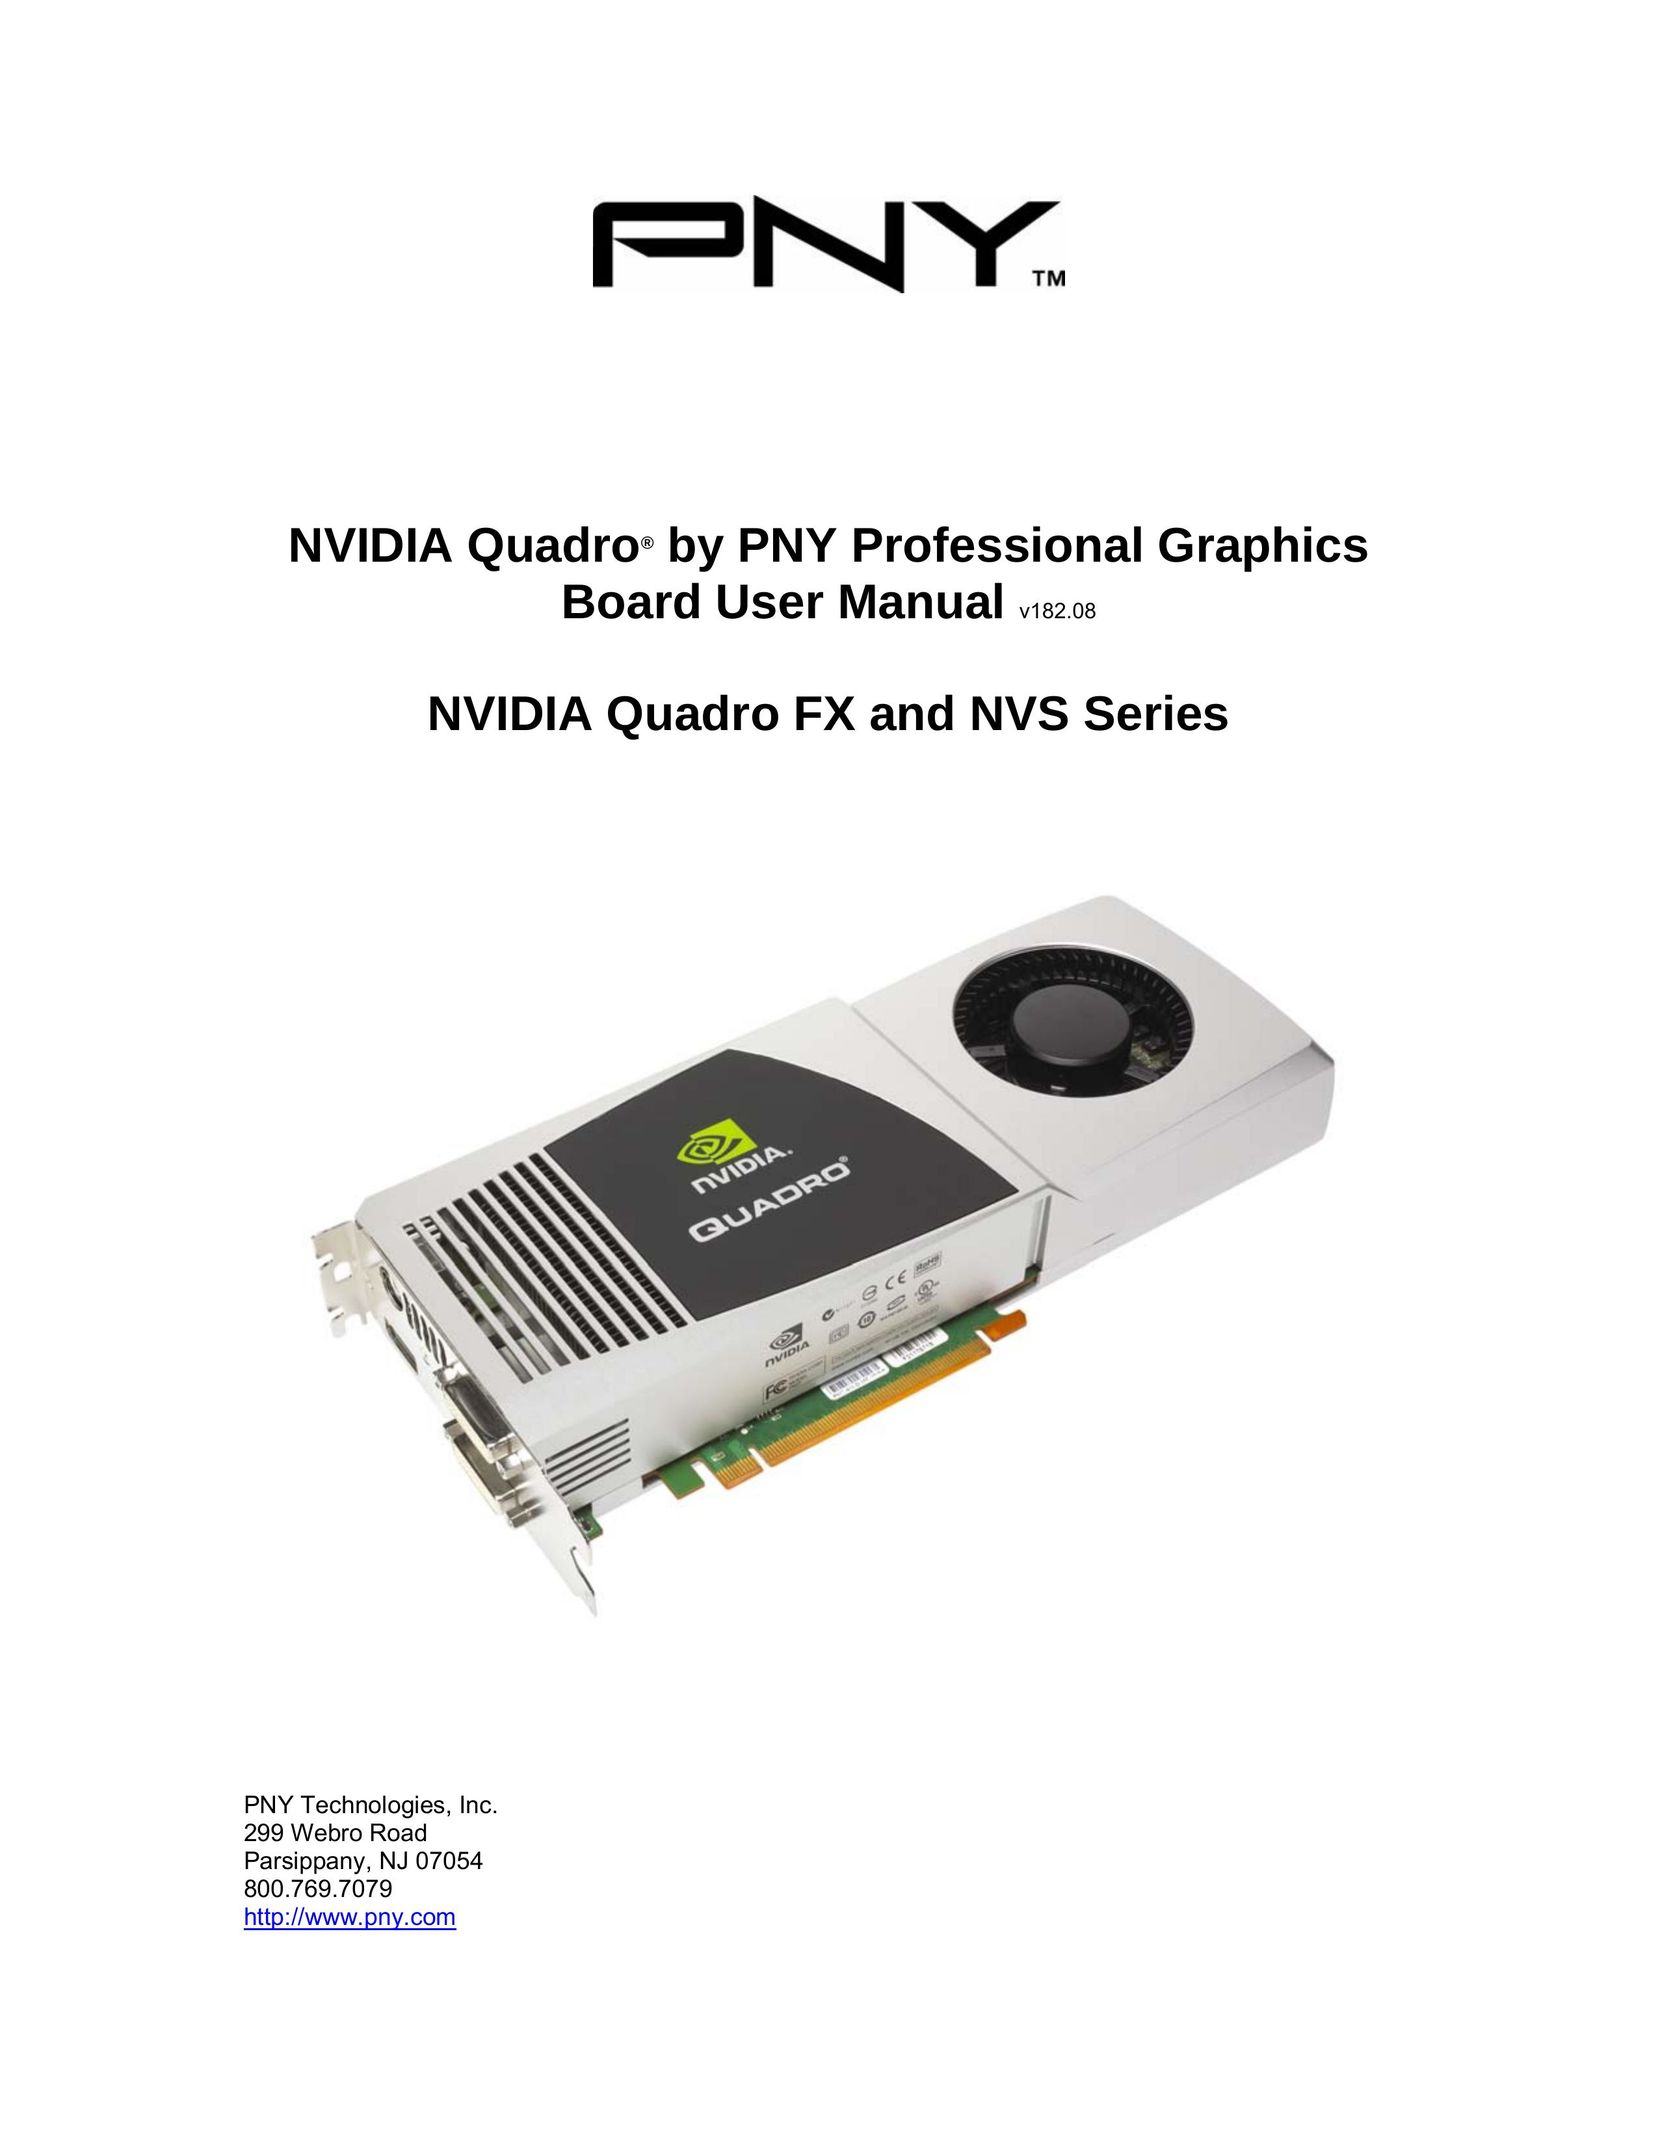 PNY FX 4800 Computer Hardware User Manual